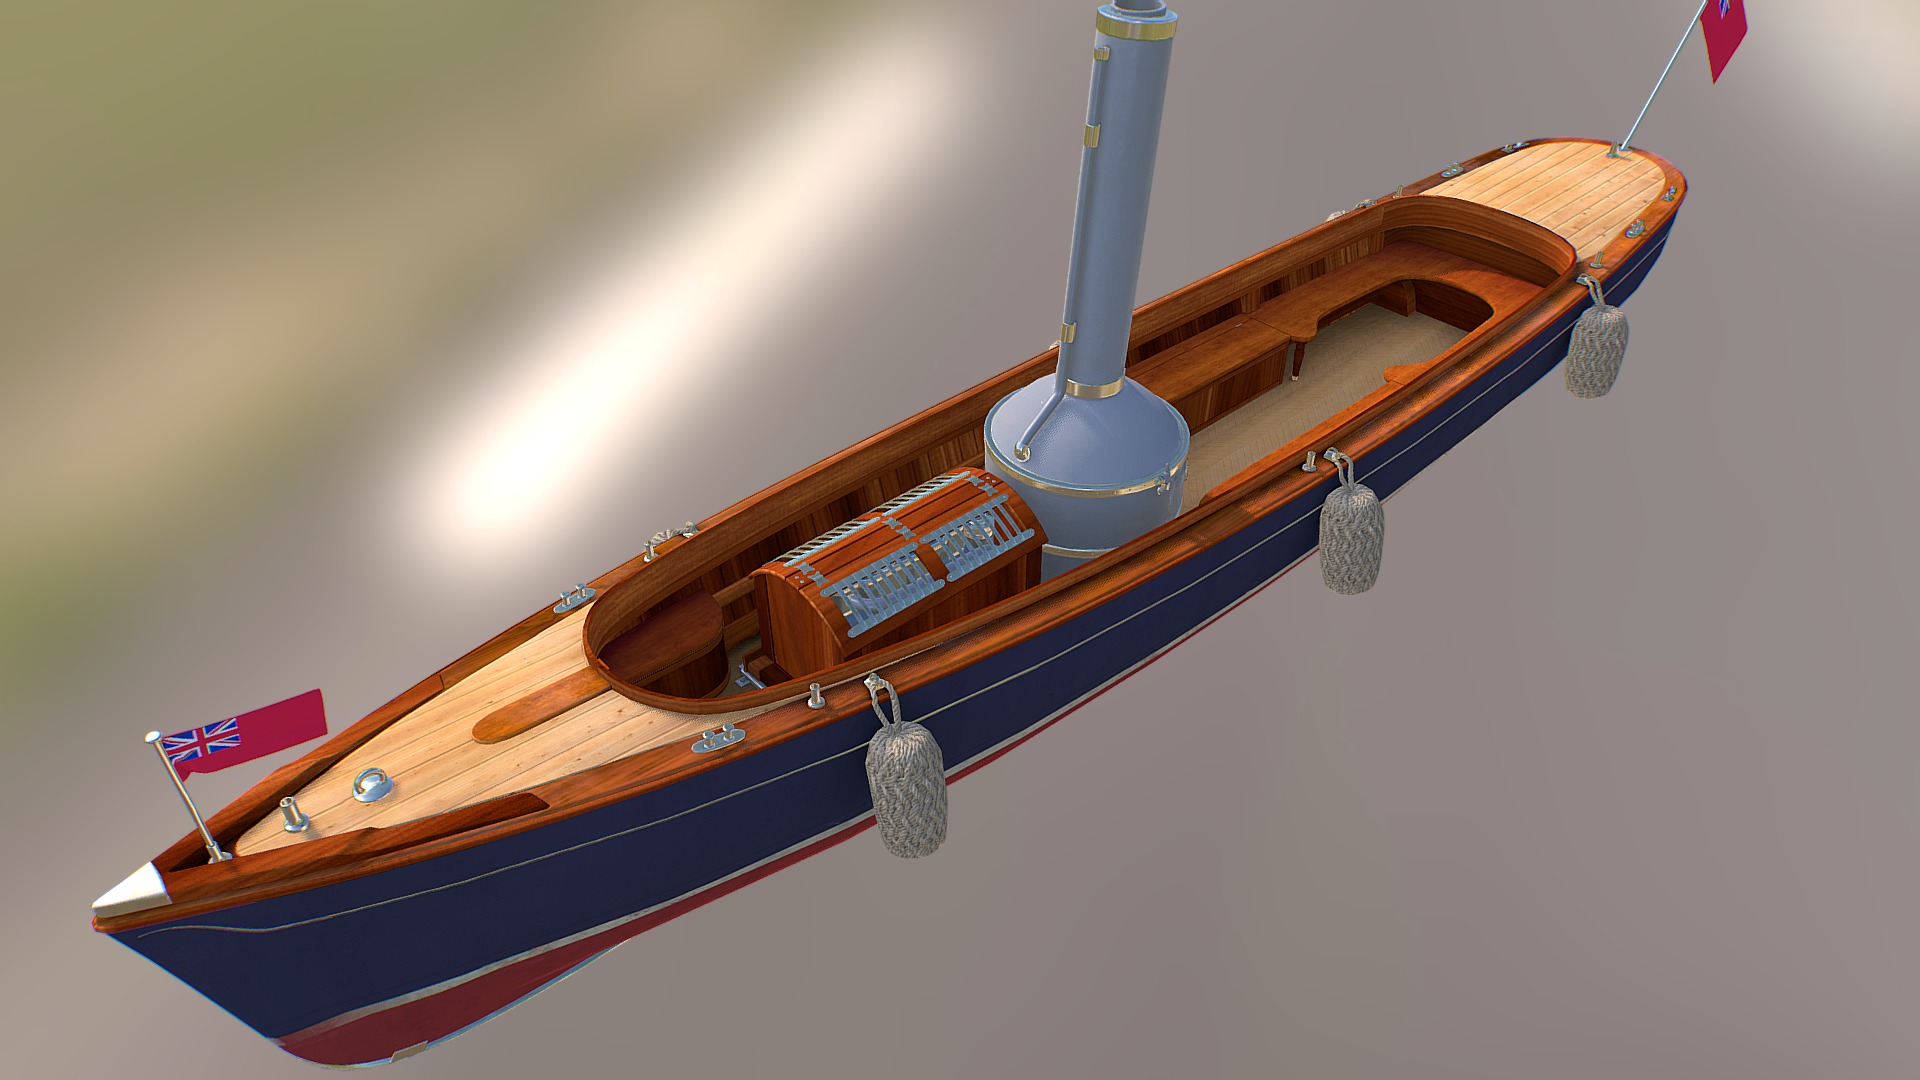 3D model Lowpoly Steam Boat - This is a 3D model of the Lowpoly Steam Boat. The 3D model is about a wooden boat with a light on top.